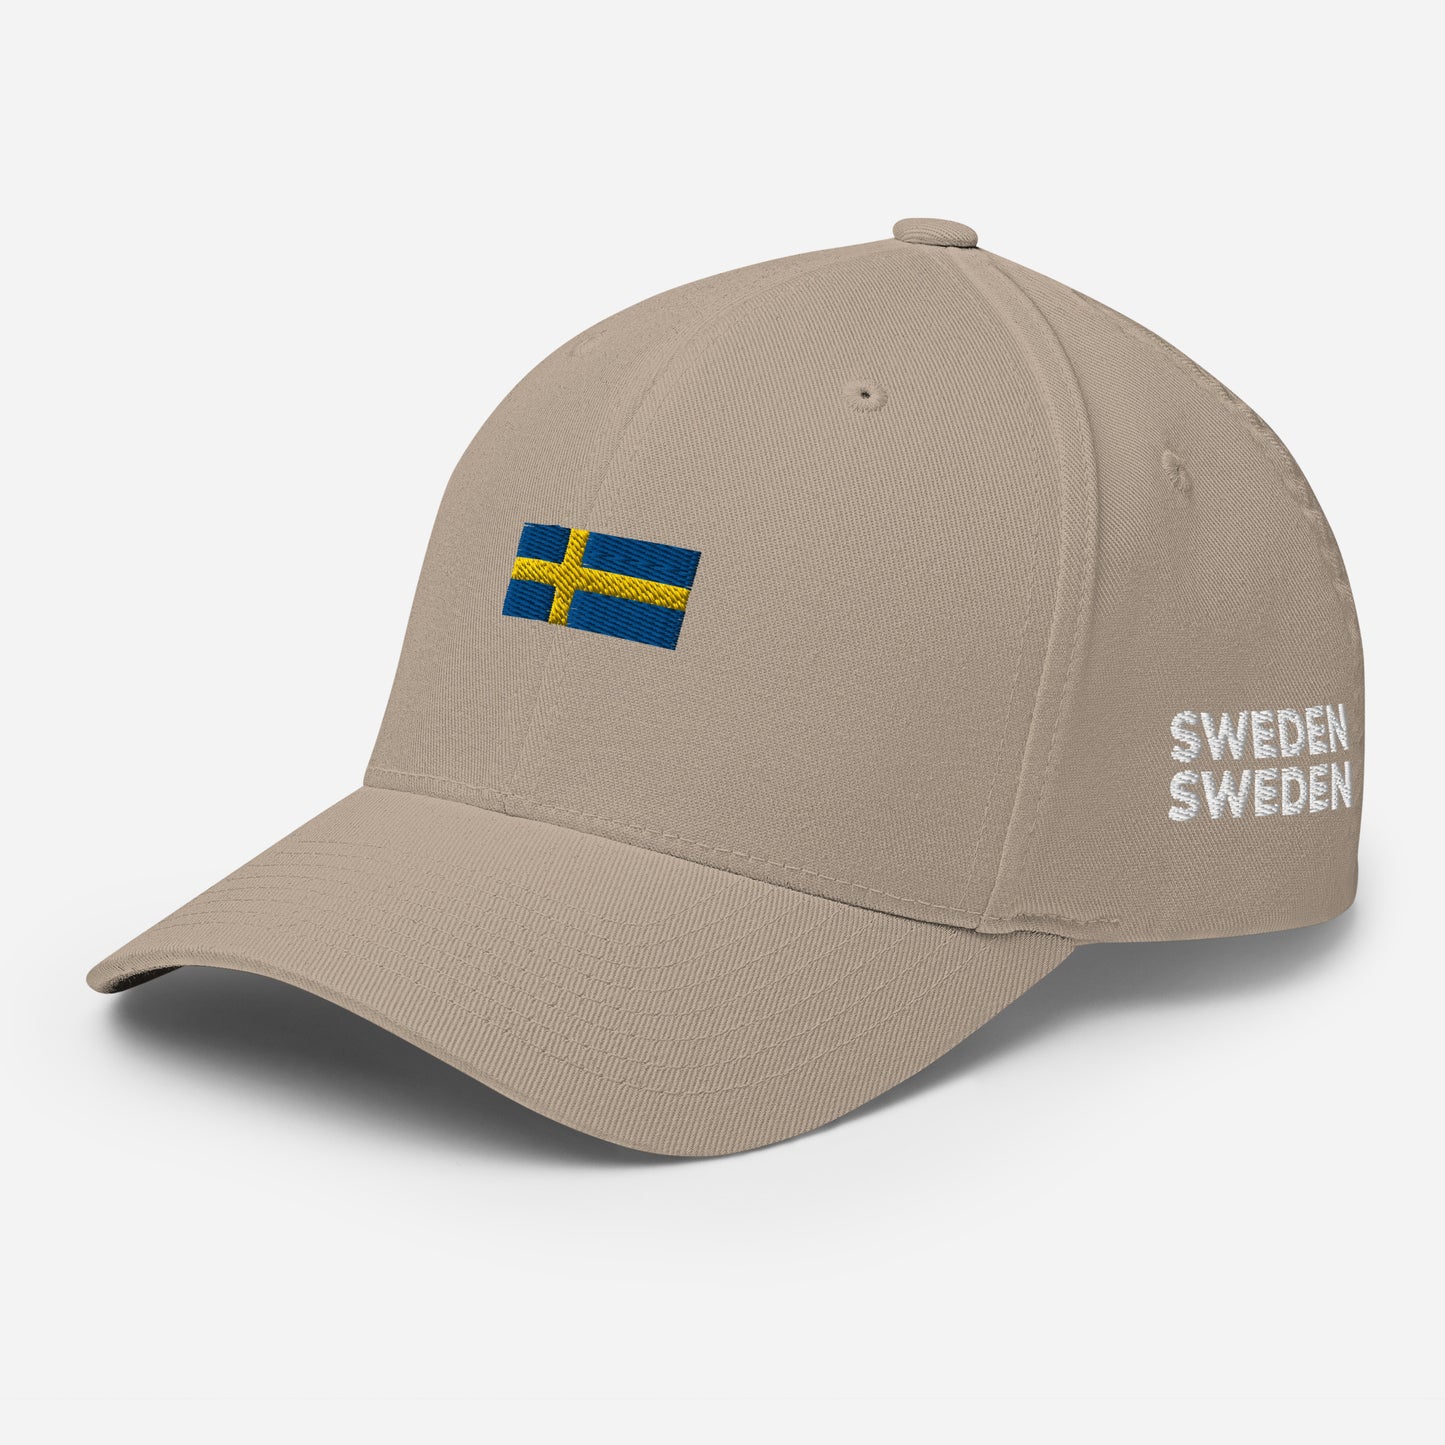 cap-from-the-front-with-swedish-flag